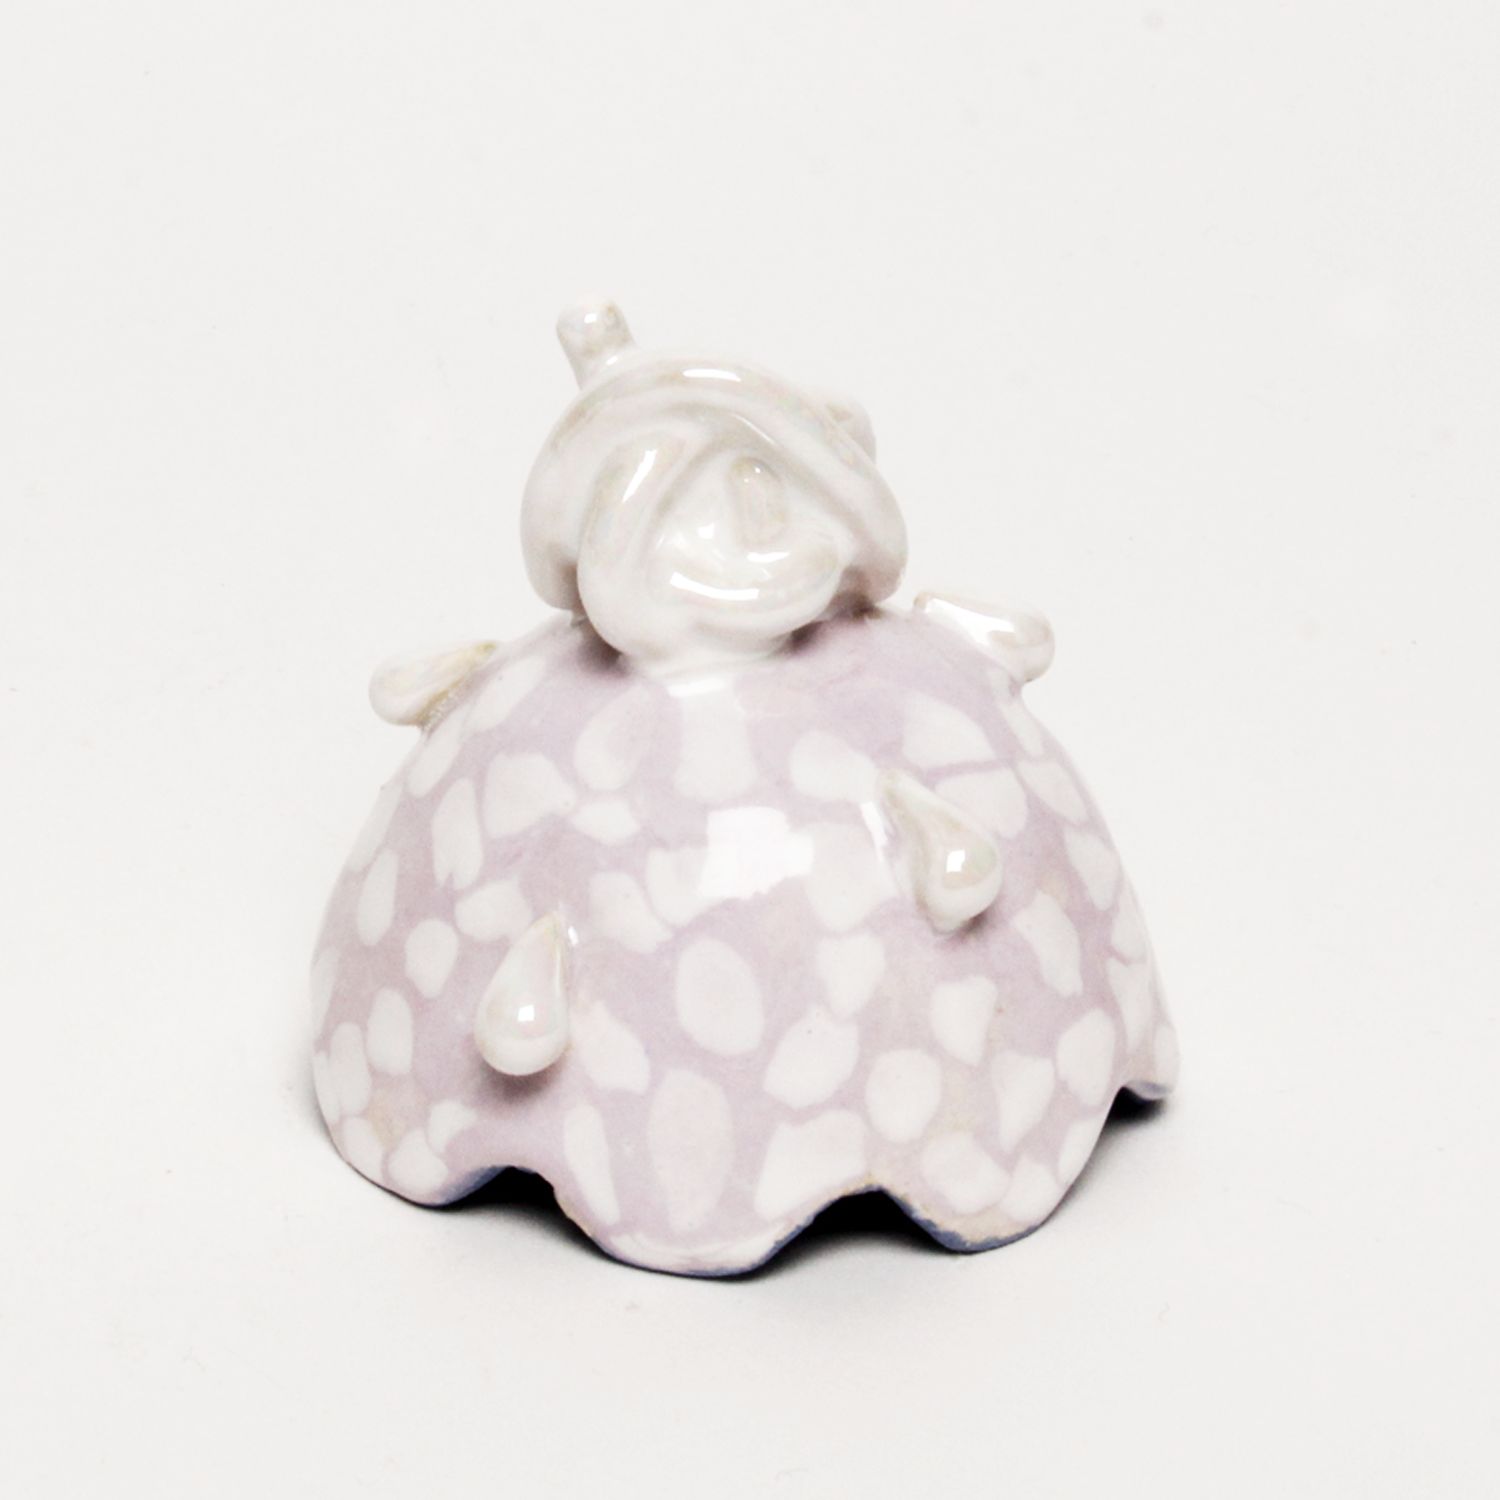 Hannah Faas: Small Sculpture in Grape Product Image 1 of 3